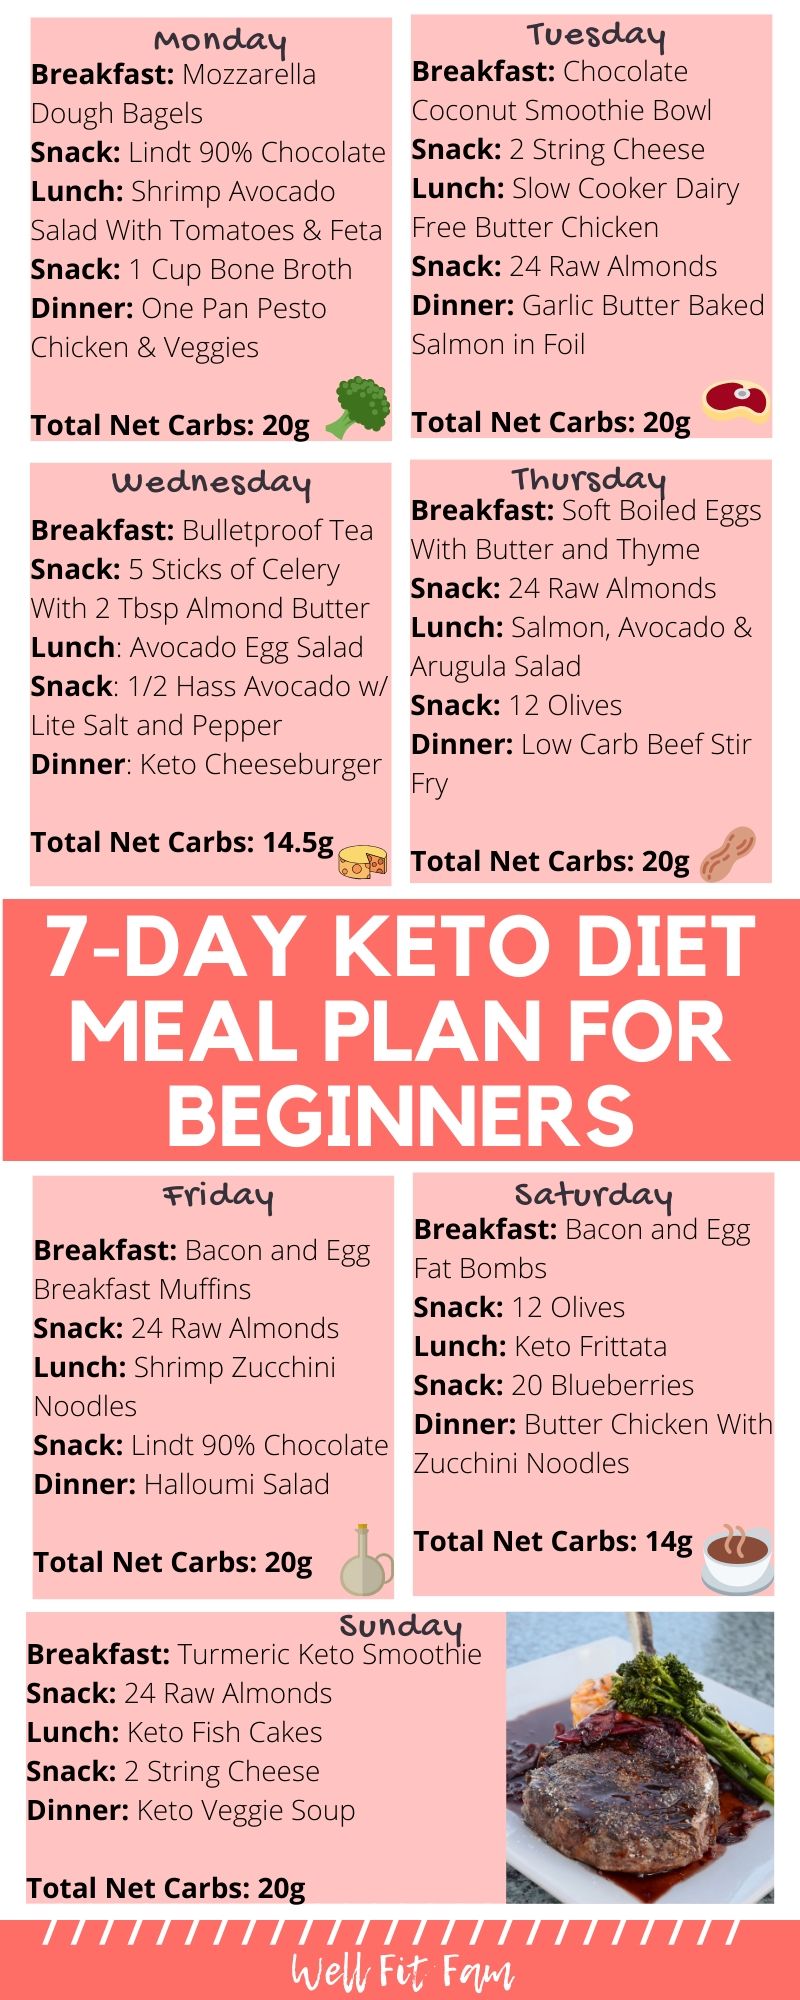 How To Build A Keto Meal Plan